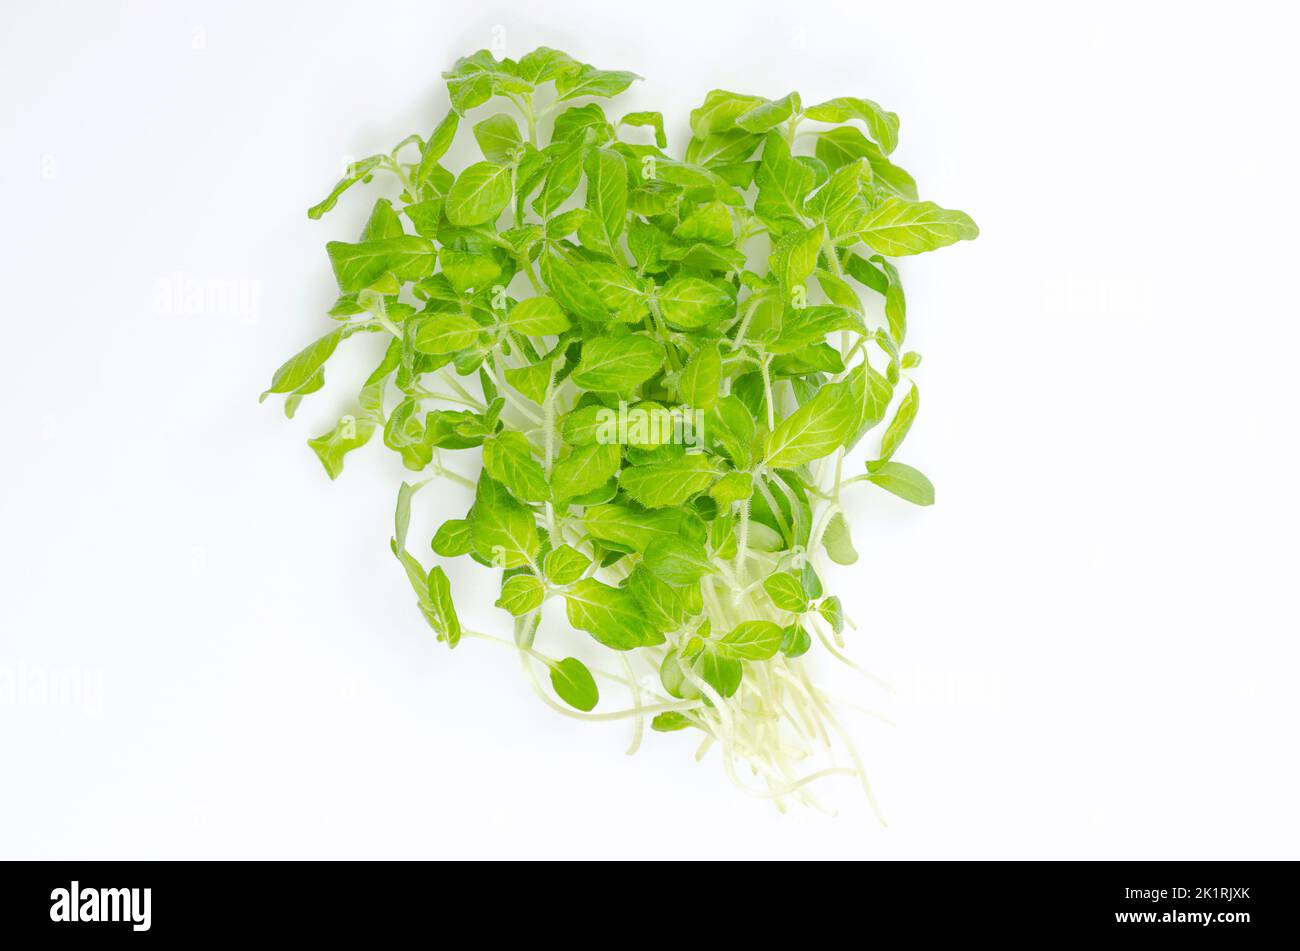 Bunch of sesame microgreens on a white background. Ready to eat, fresh and green young plants of Sesamum, also known as benne. Stock Photo